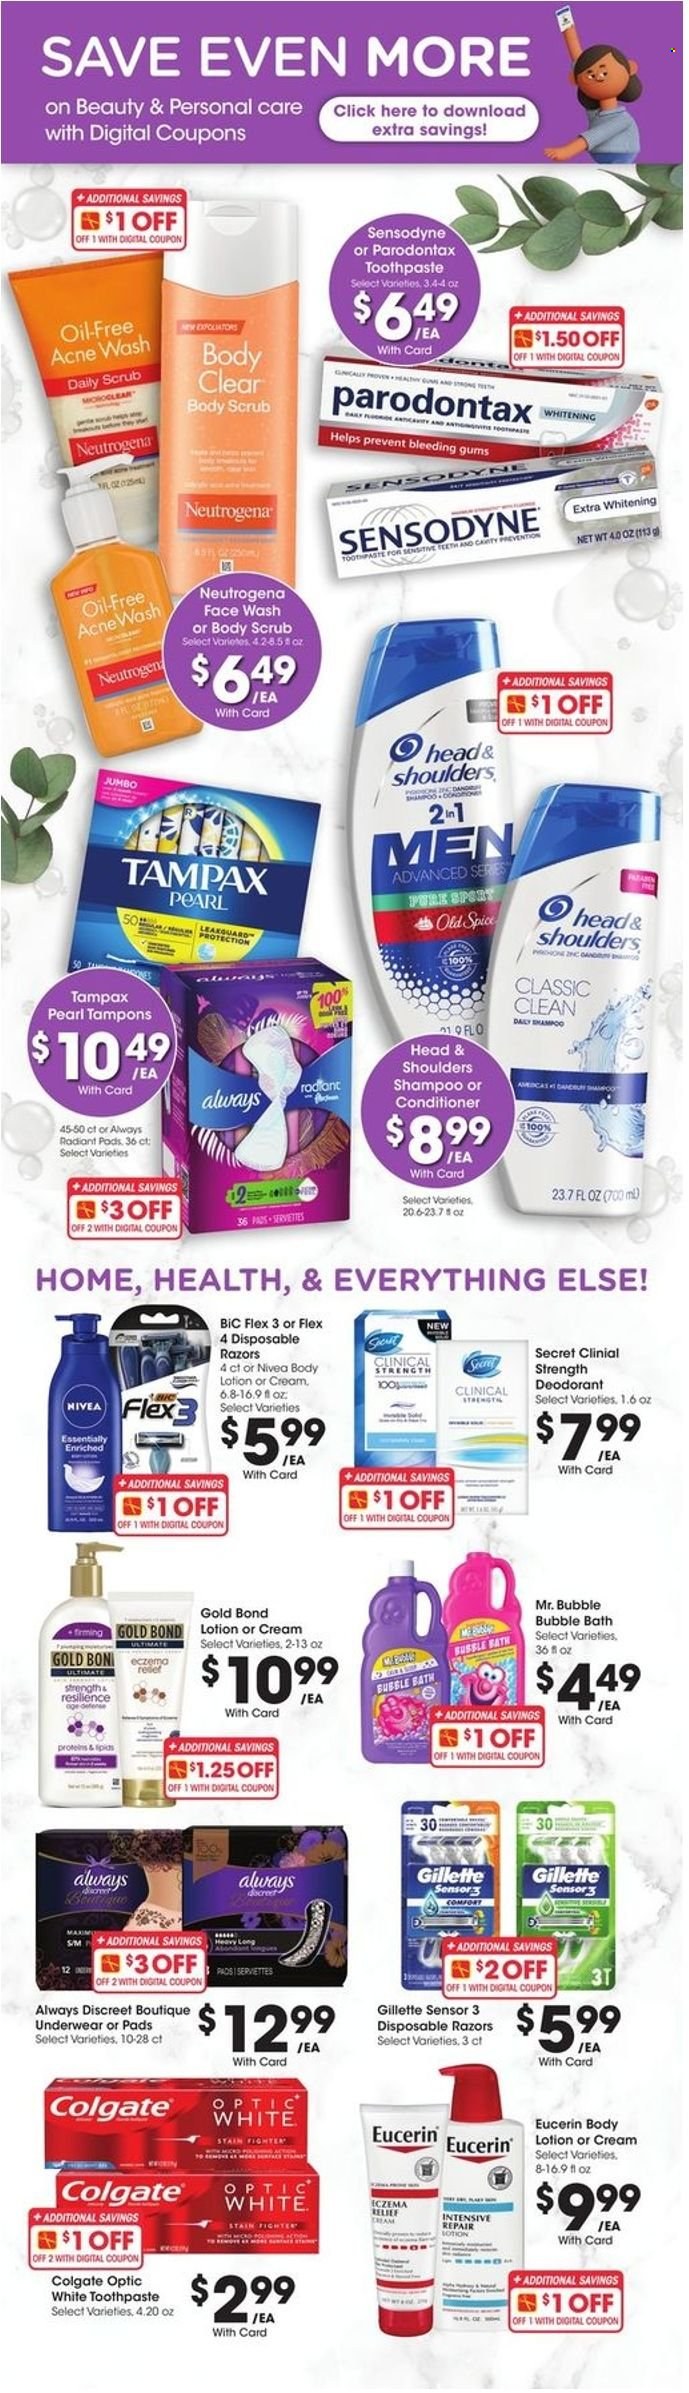 thumbnail - City Market Flyer - 01/05/2022 - 02/01/2022 - Sales products - spice, Nivea, bubble bath, shampoo, Old Spice, face gel, Colgate, toothpaste, Sensodyne, Tampax, Always Discreet, tampons, Neutrogena, face wash, conditioner, Head & Shoulders, body lotion, body scrub, Daily Scrub, Eucerin, anti-perspirant, deodorant, BIC, Gillette, disposable razor. Page 1.